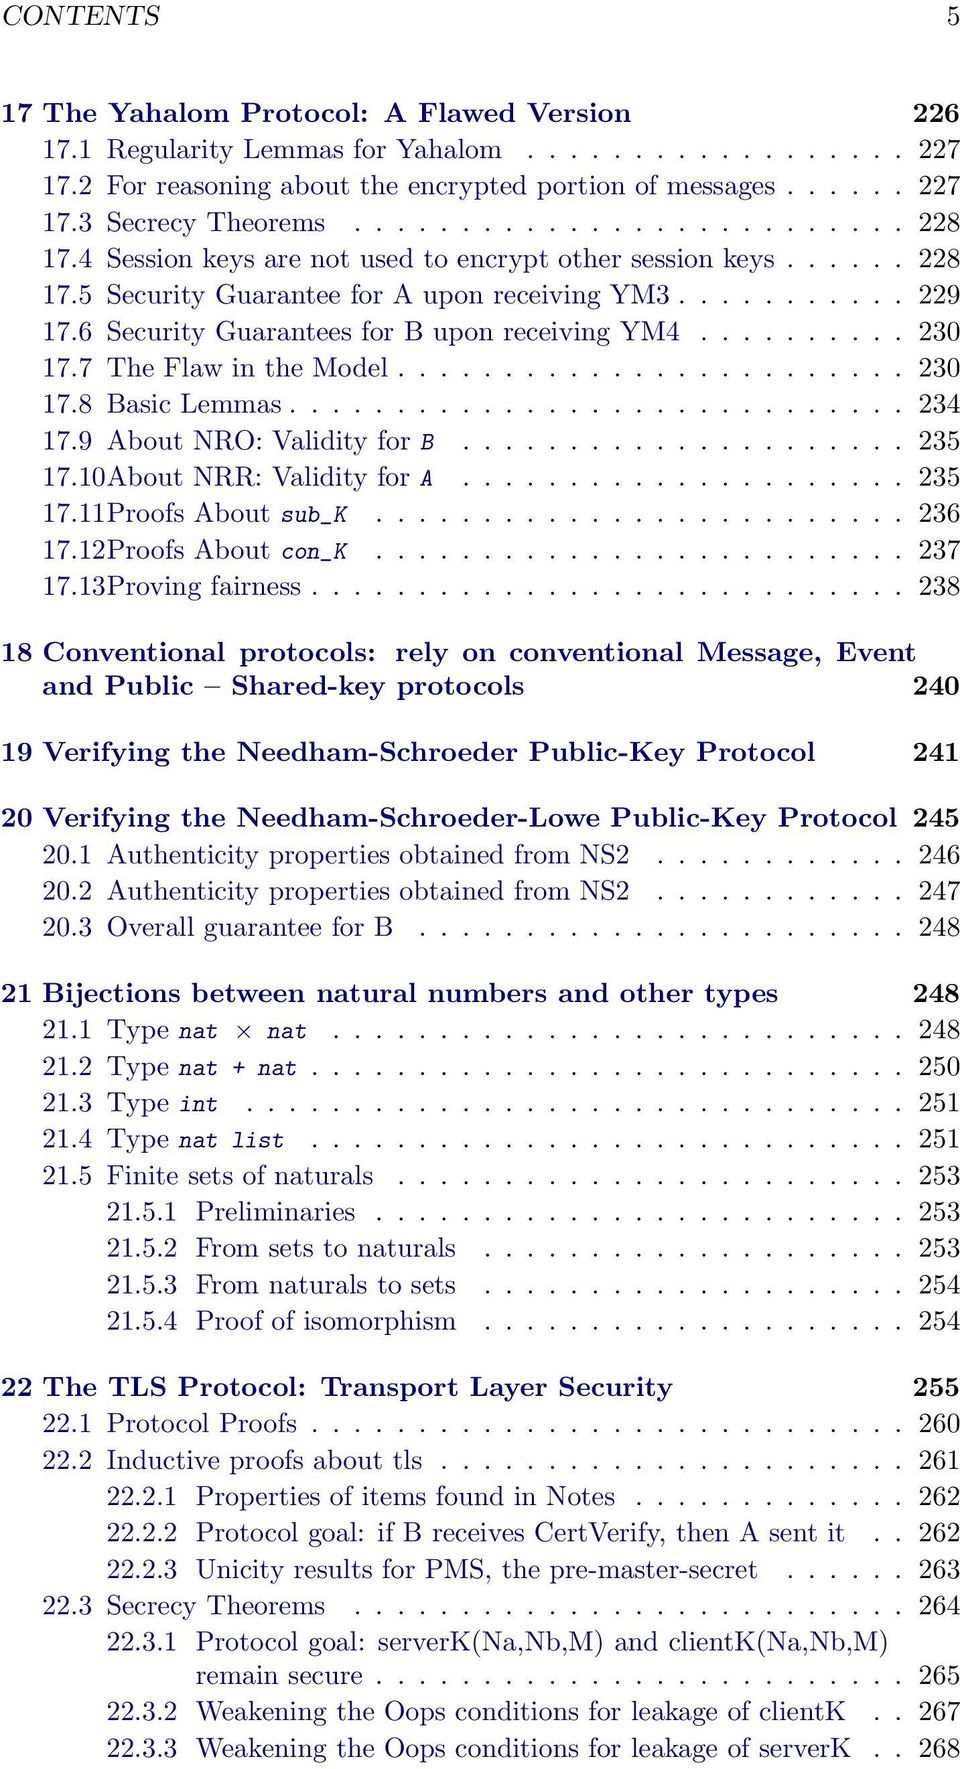 6 Security Guarantees for B upon receiving YM4.......... 230 17.7 The Flaw in the Model........................ 230 17.8 Basic Lemmas............................. 234 17.9 About NRO: Validity for B.